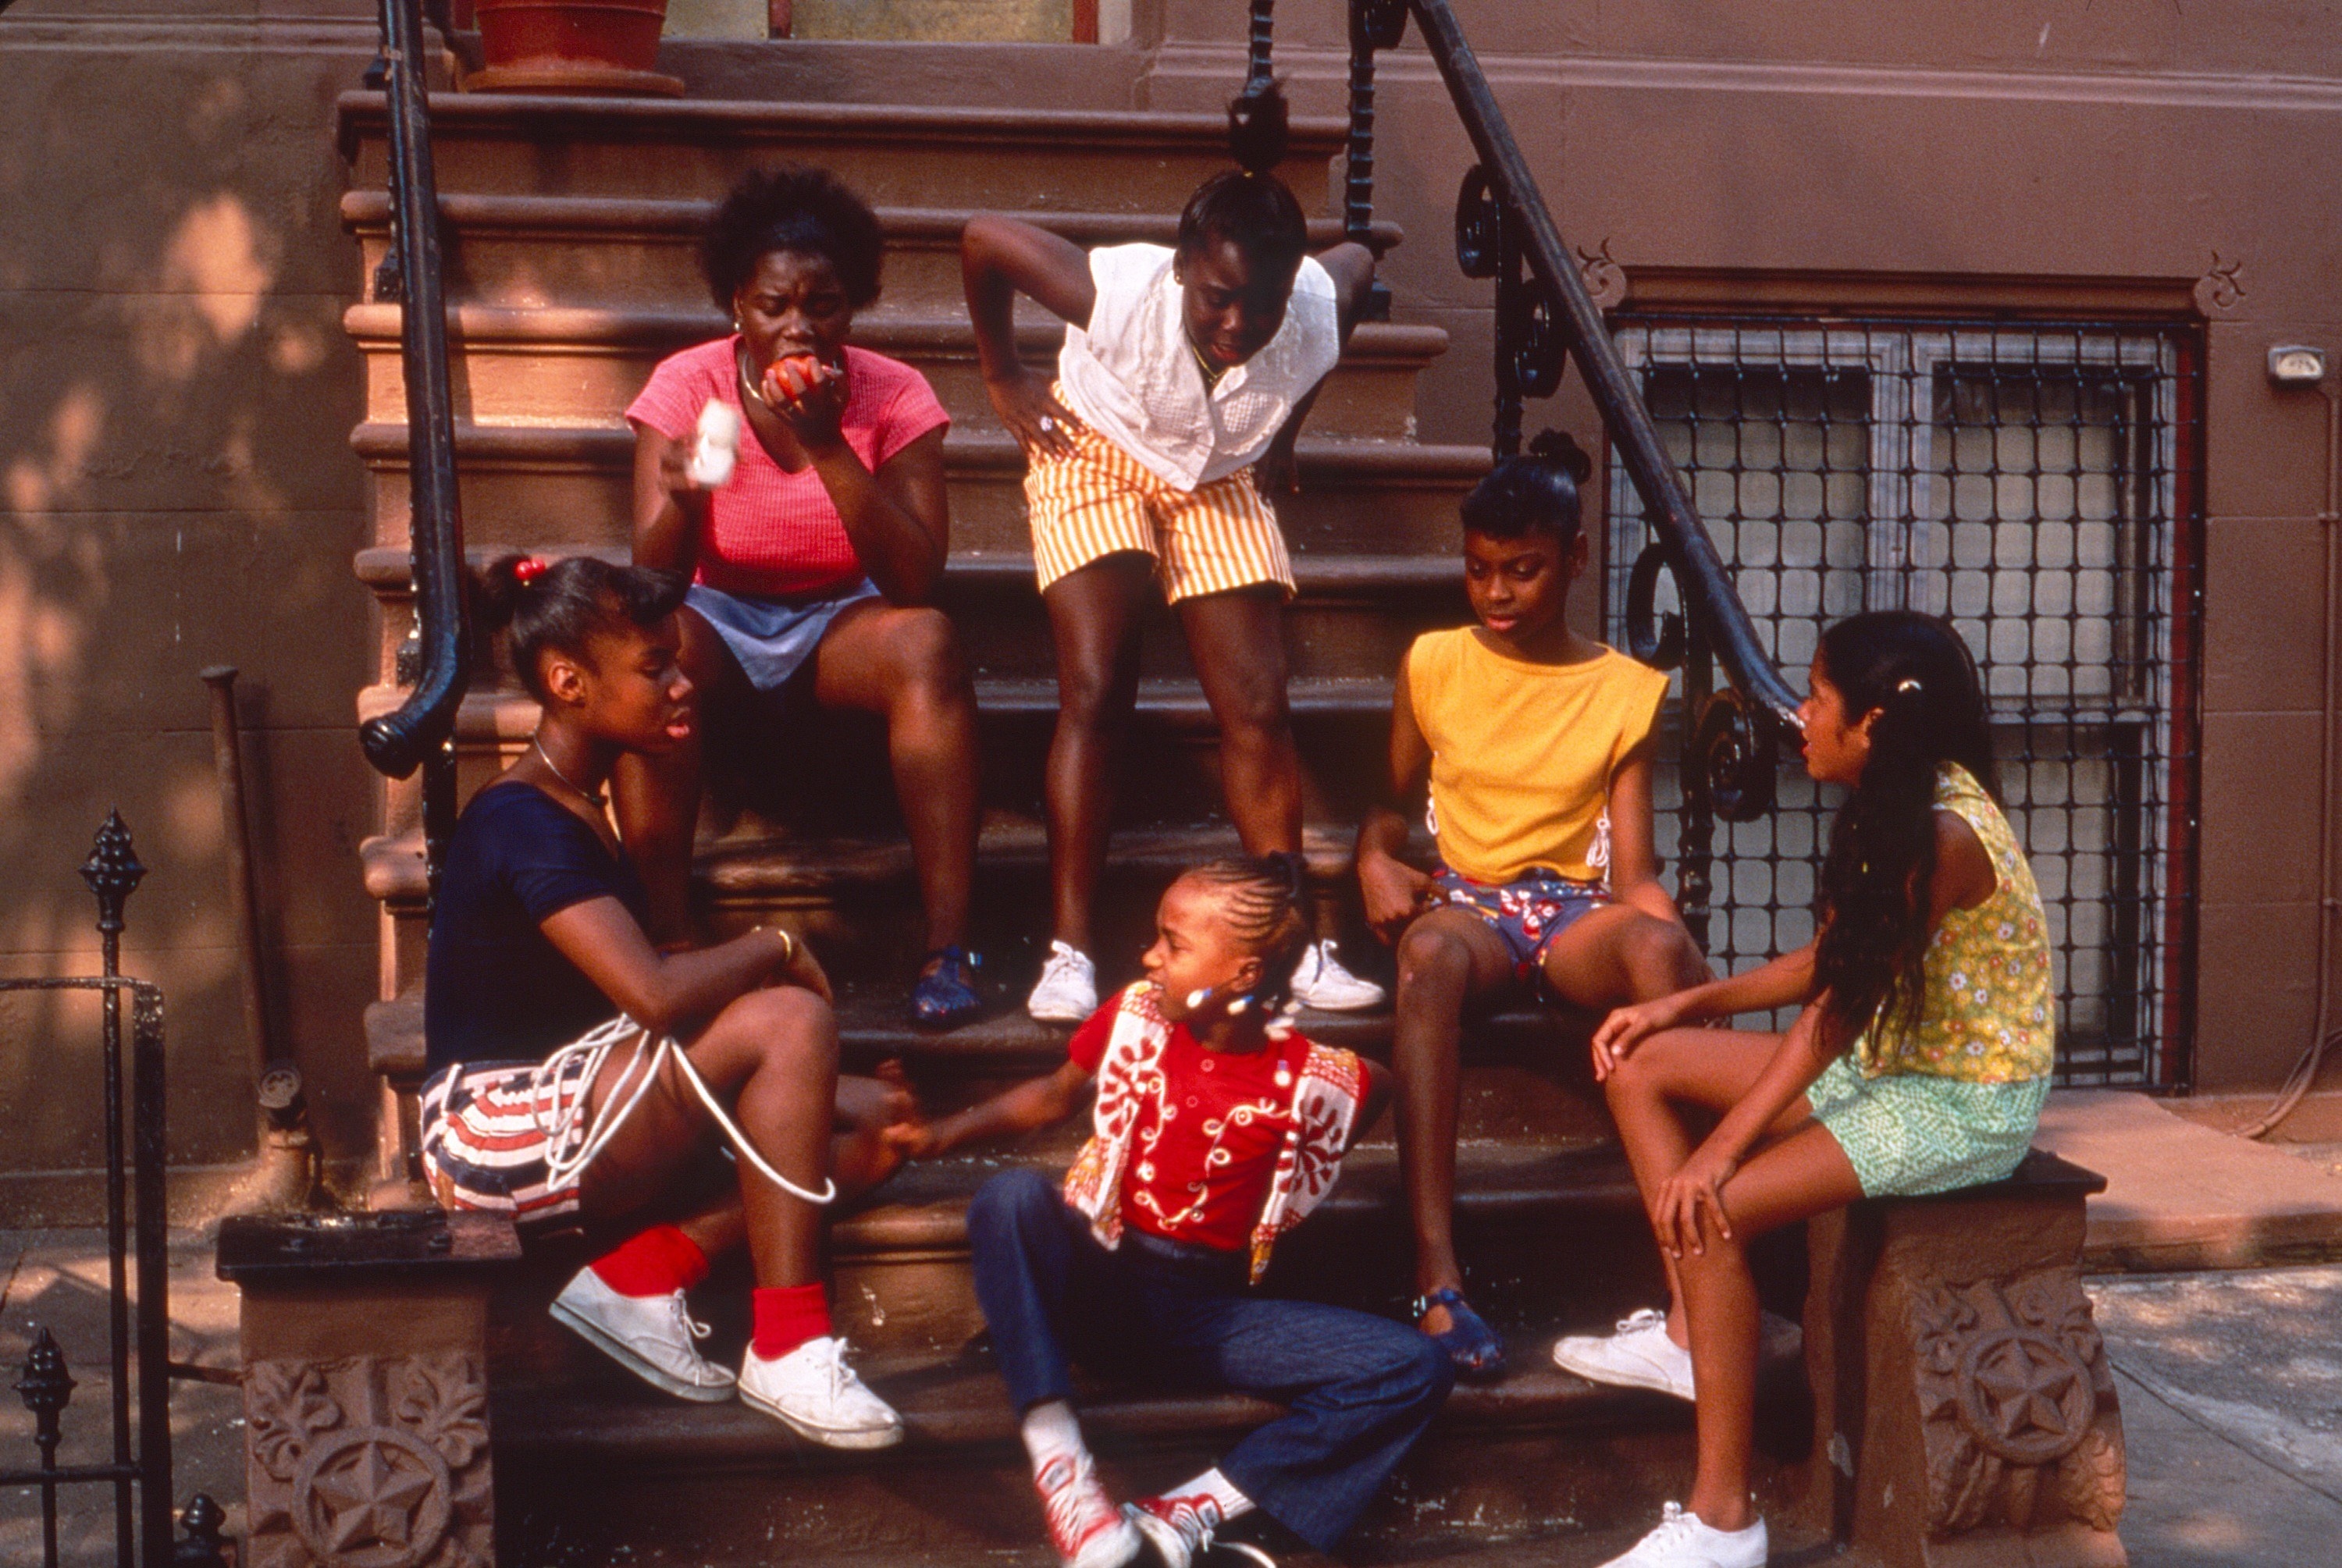 The cast members sitting on a stoop